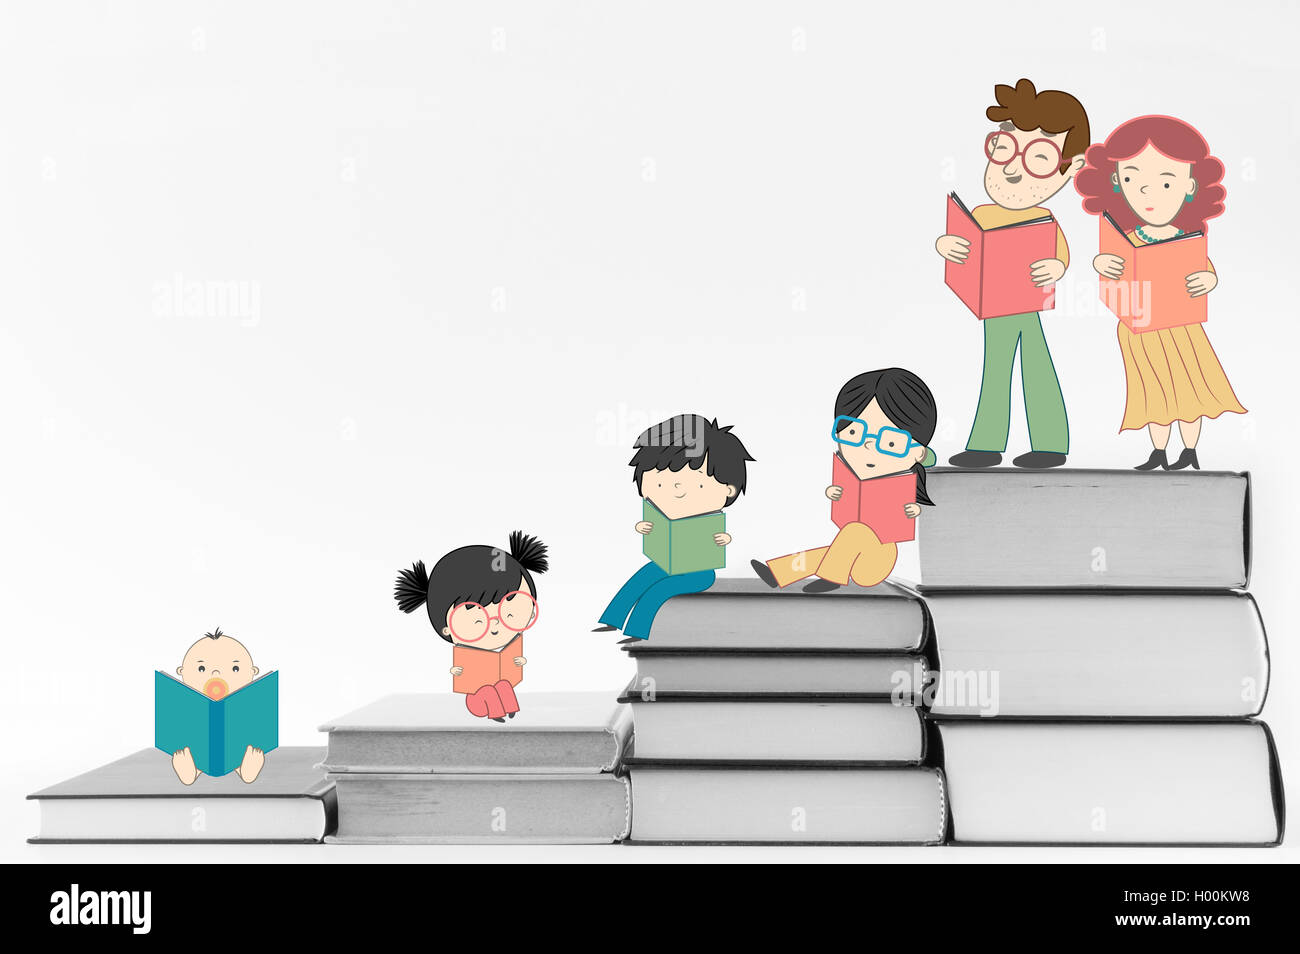 Boys and girls reading books for children education and young culture growth illustration Stock Photo